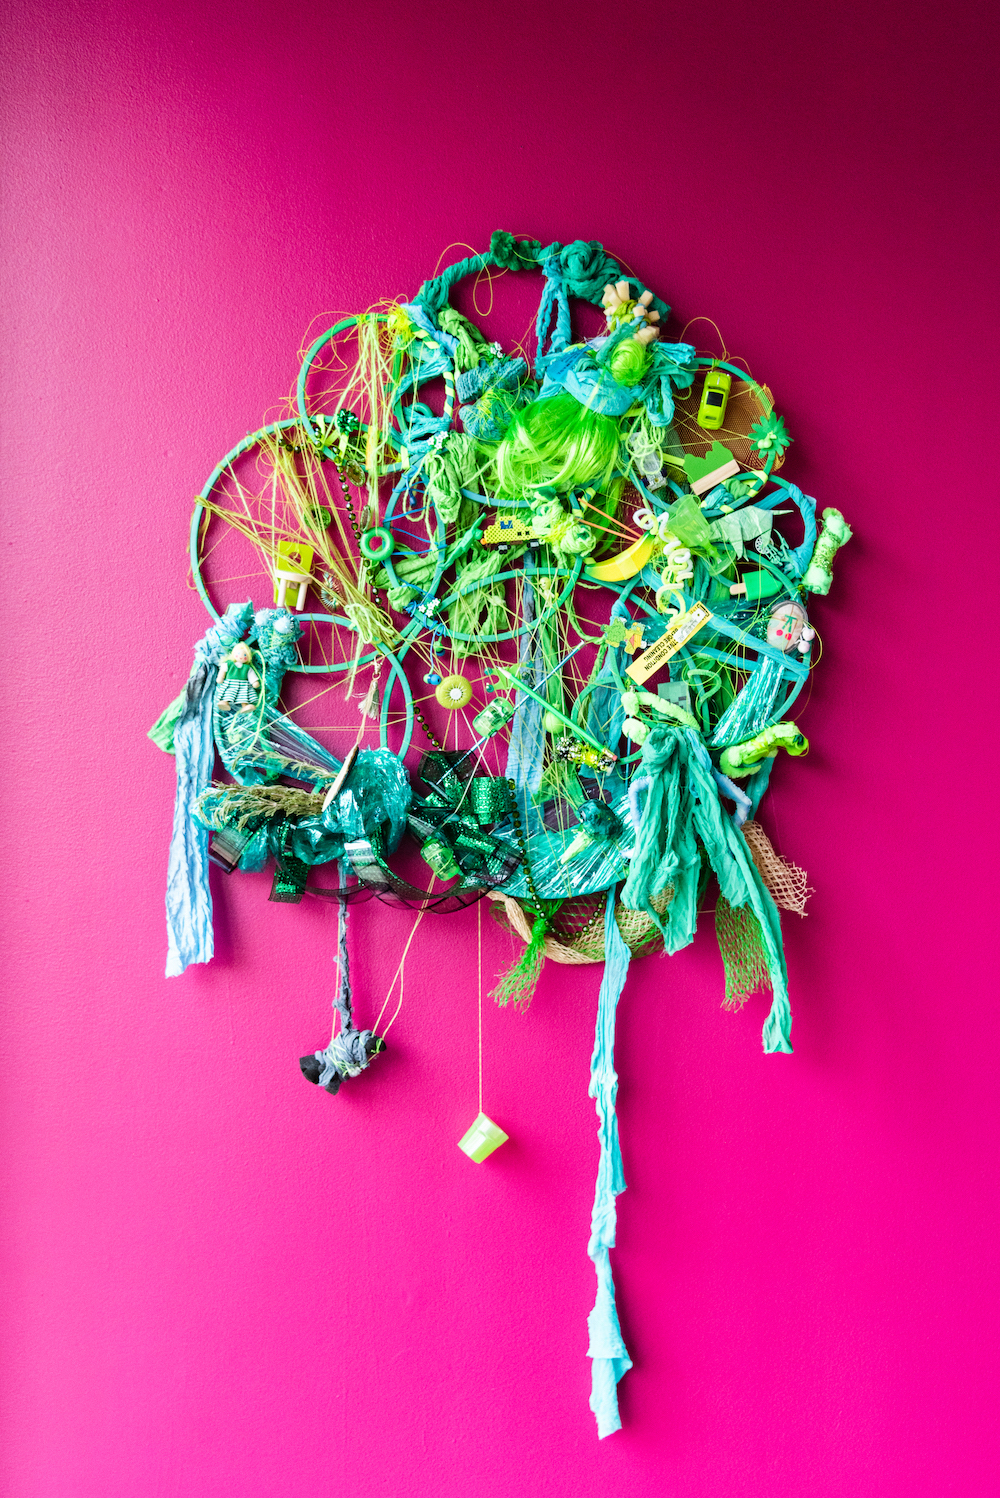 Mixed media assemblage in green tones on an vibrant pink wall